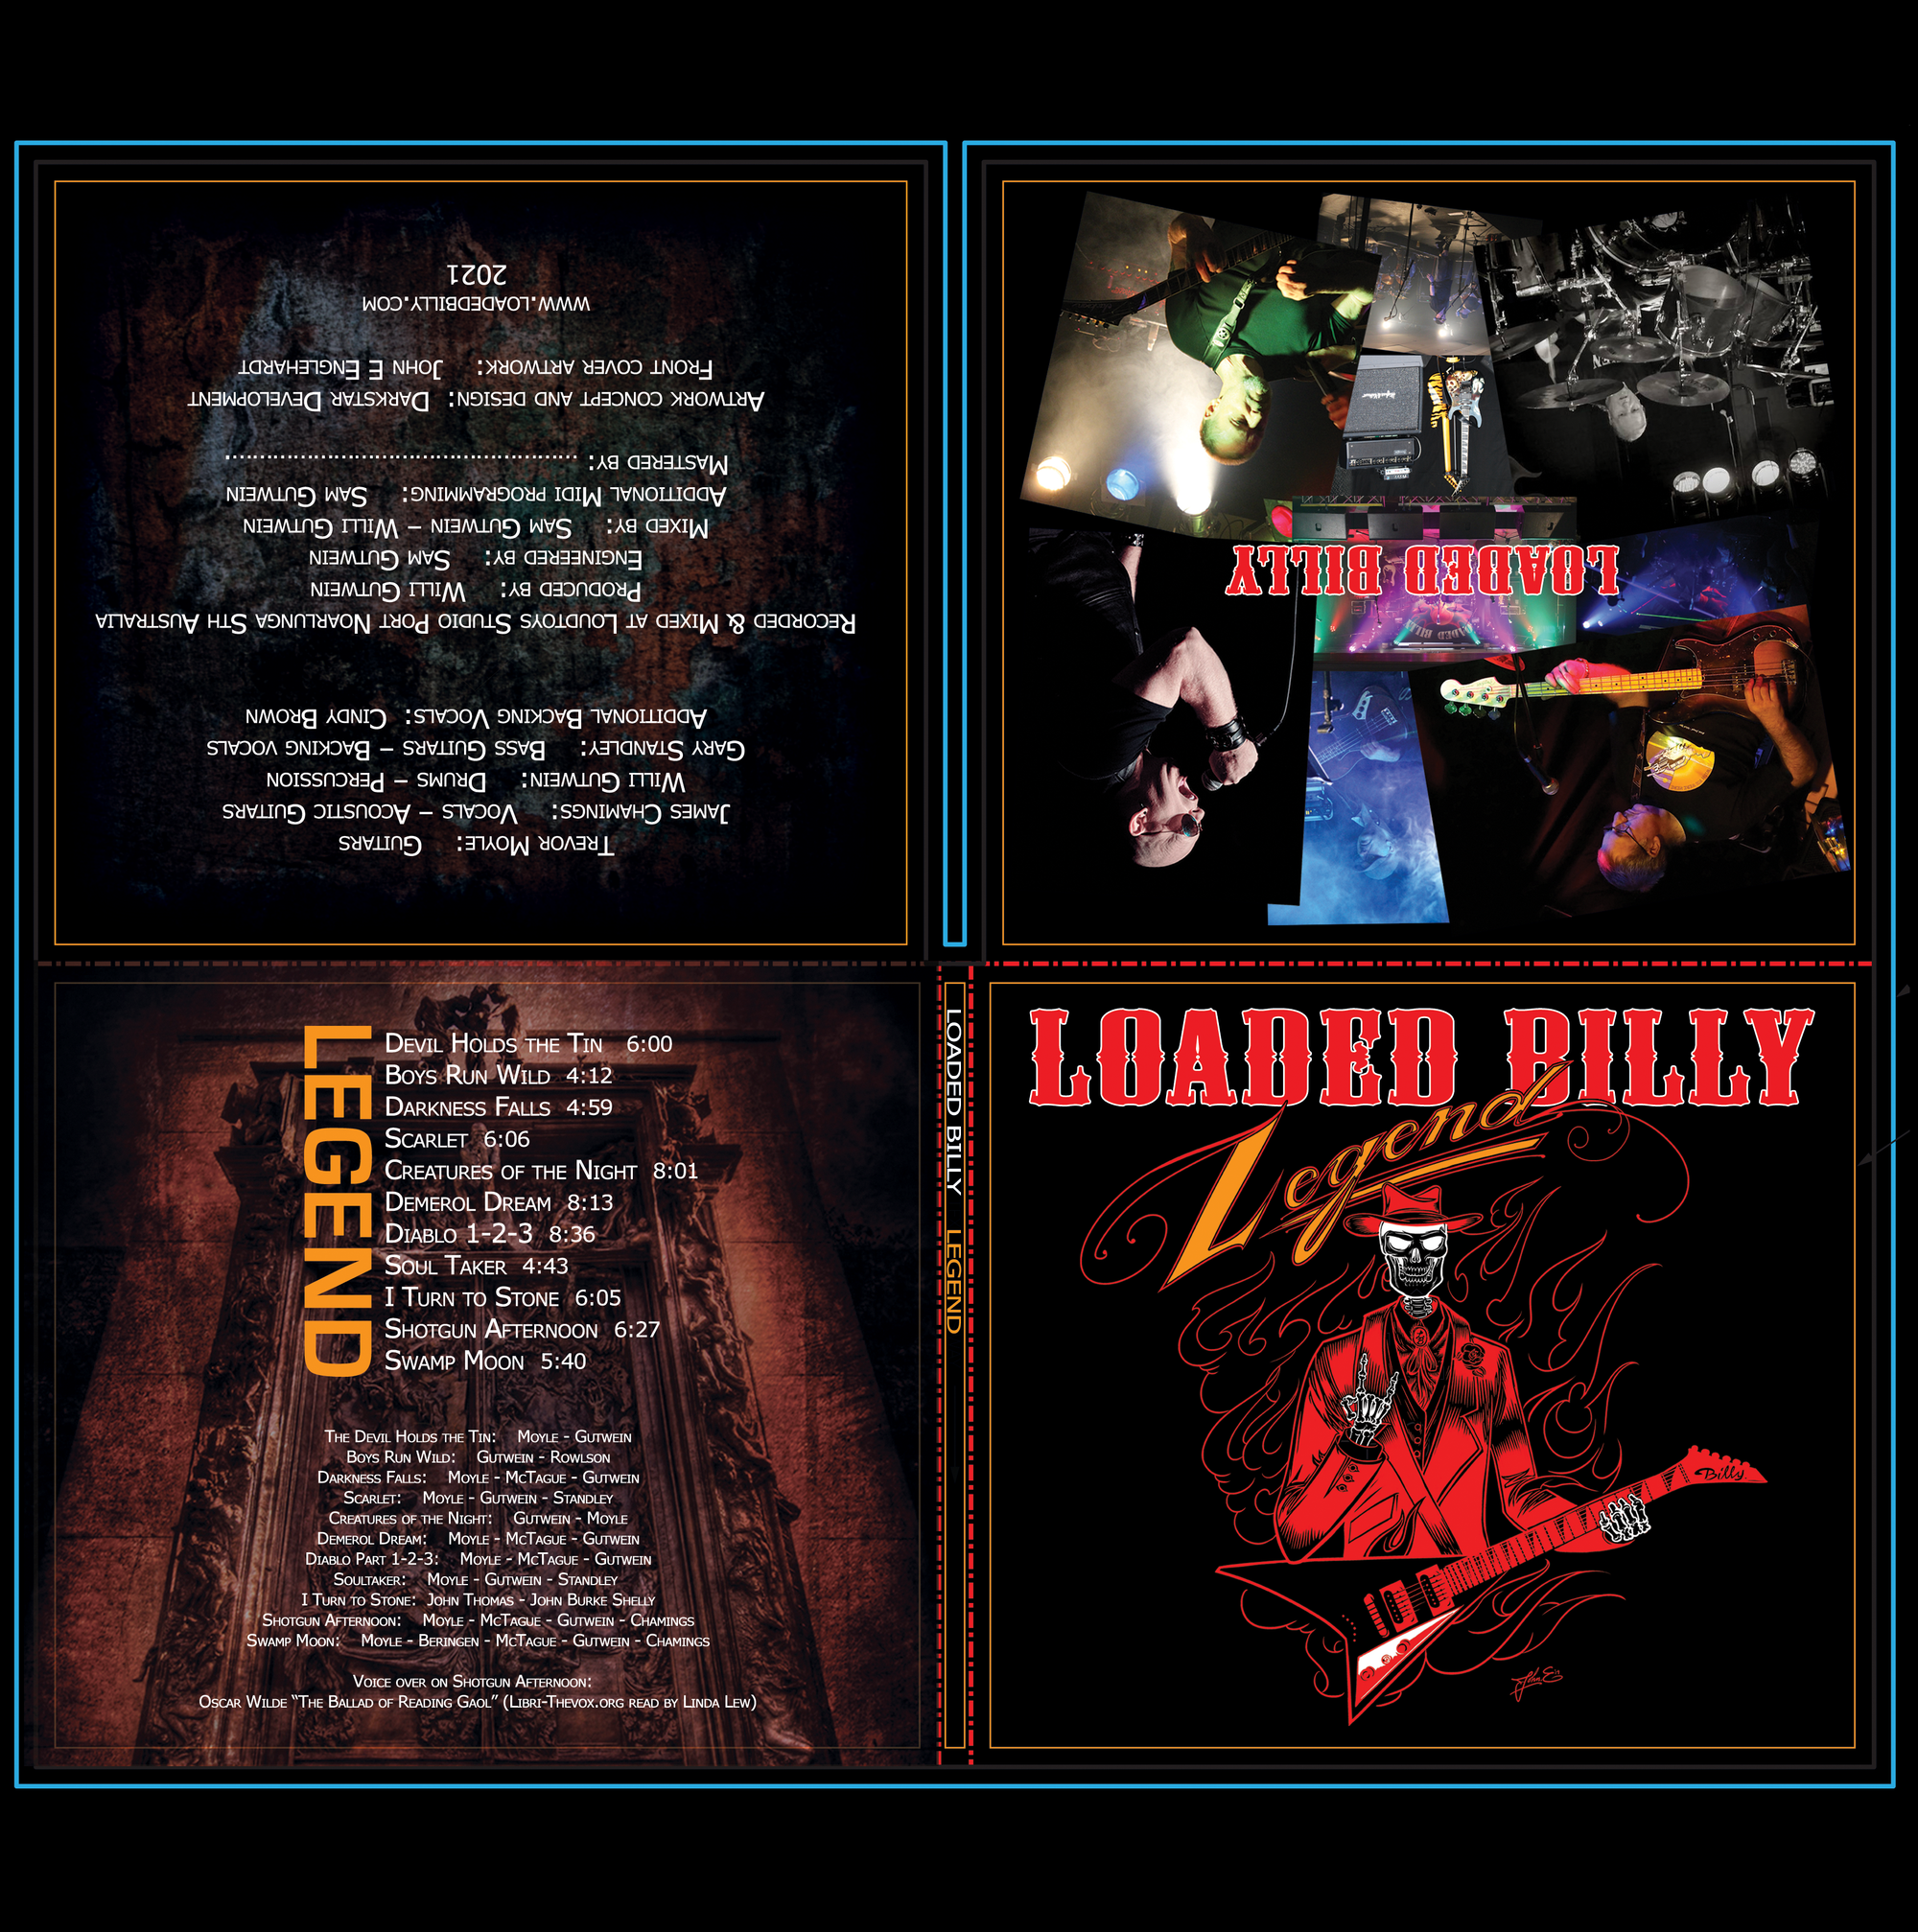 CD Cover design and layout